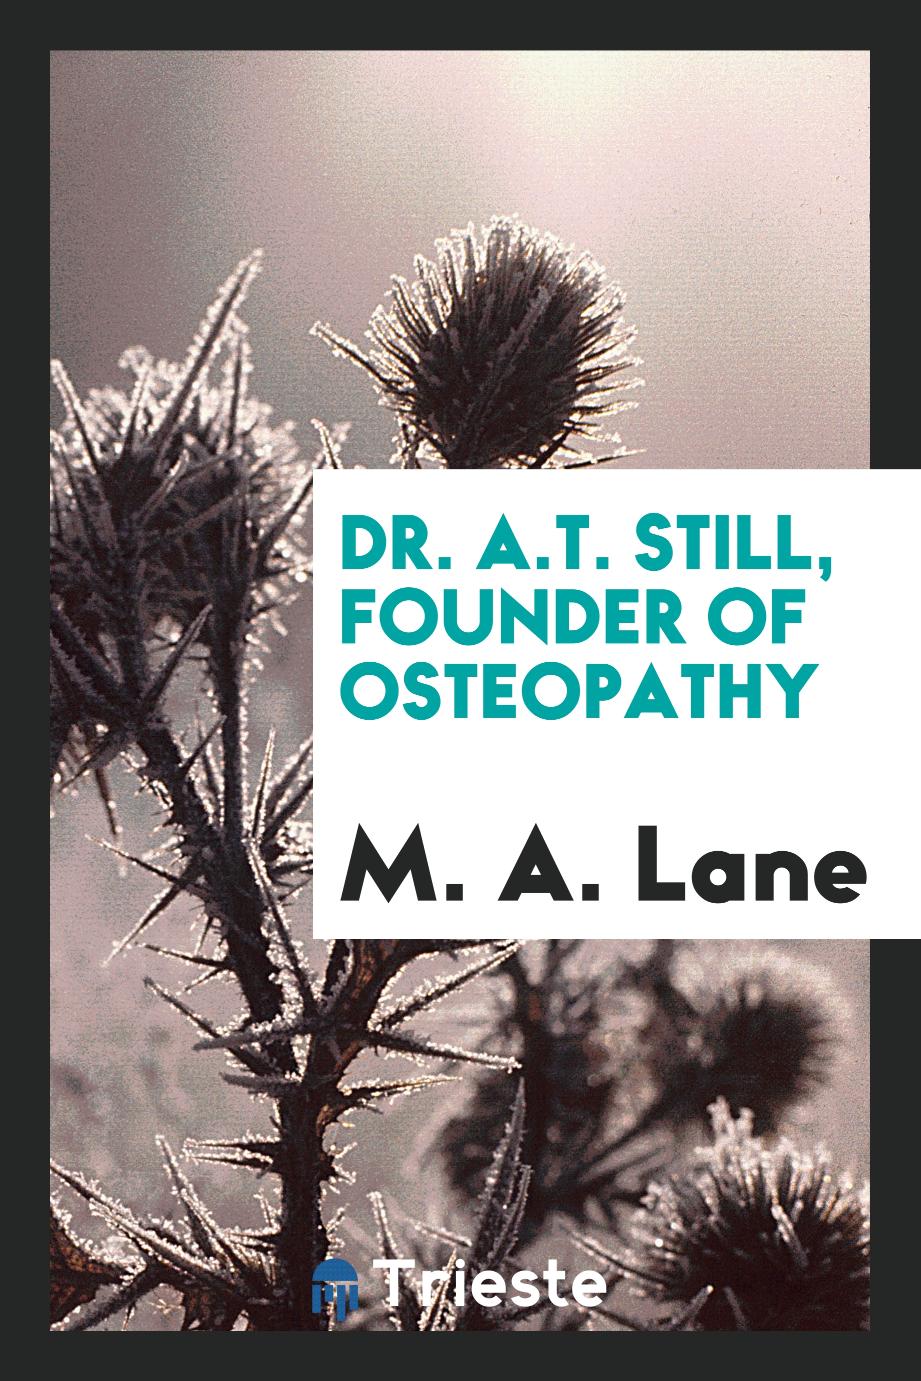 M. A. Lane - Dr. A.T. Still, founder of osteopathy